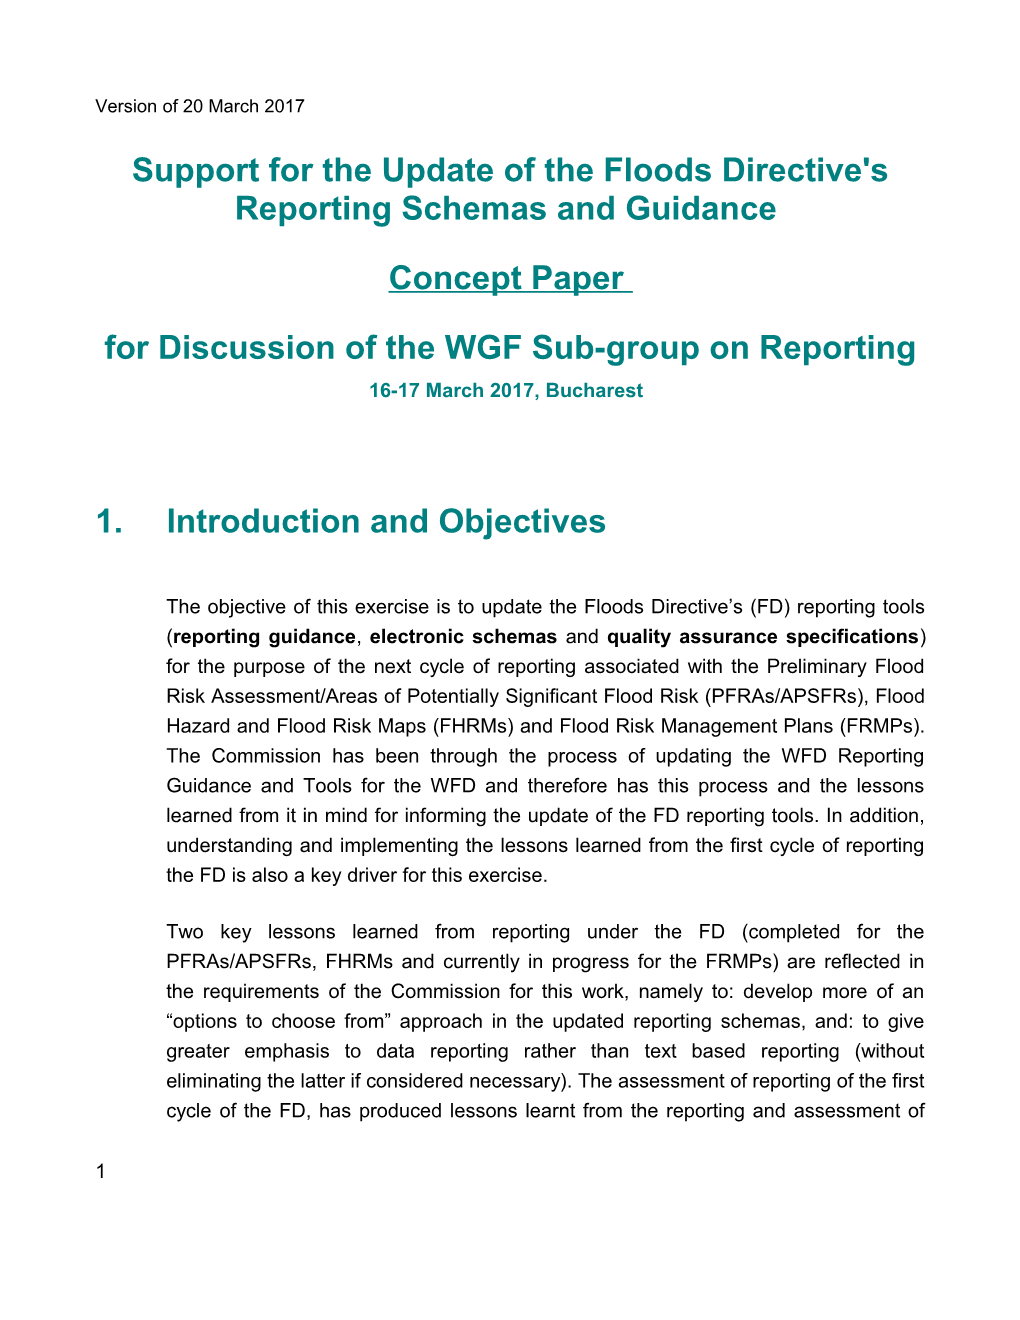 Support for the Update of the Floods Directive's Reportingschemas and Guidance